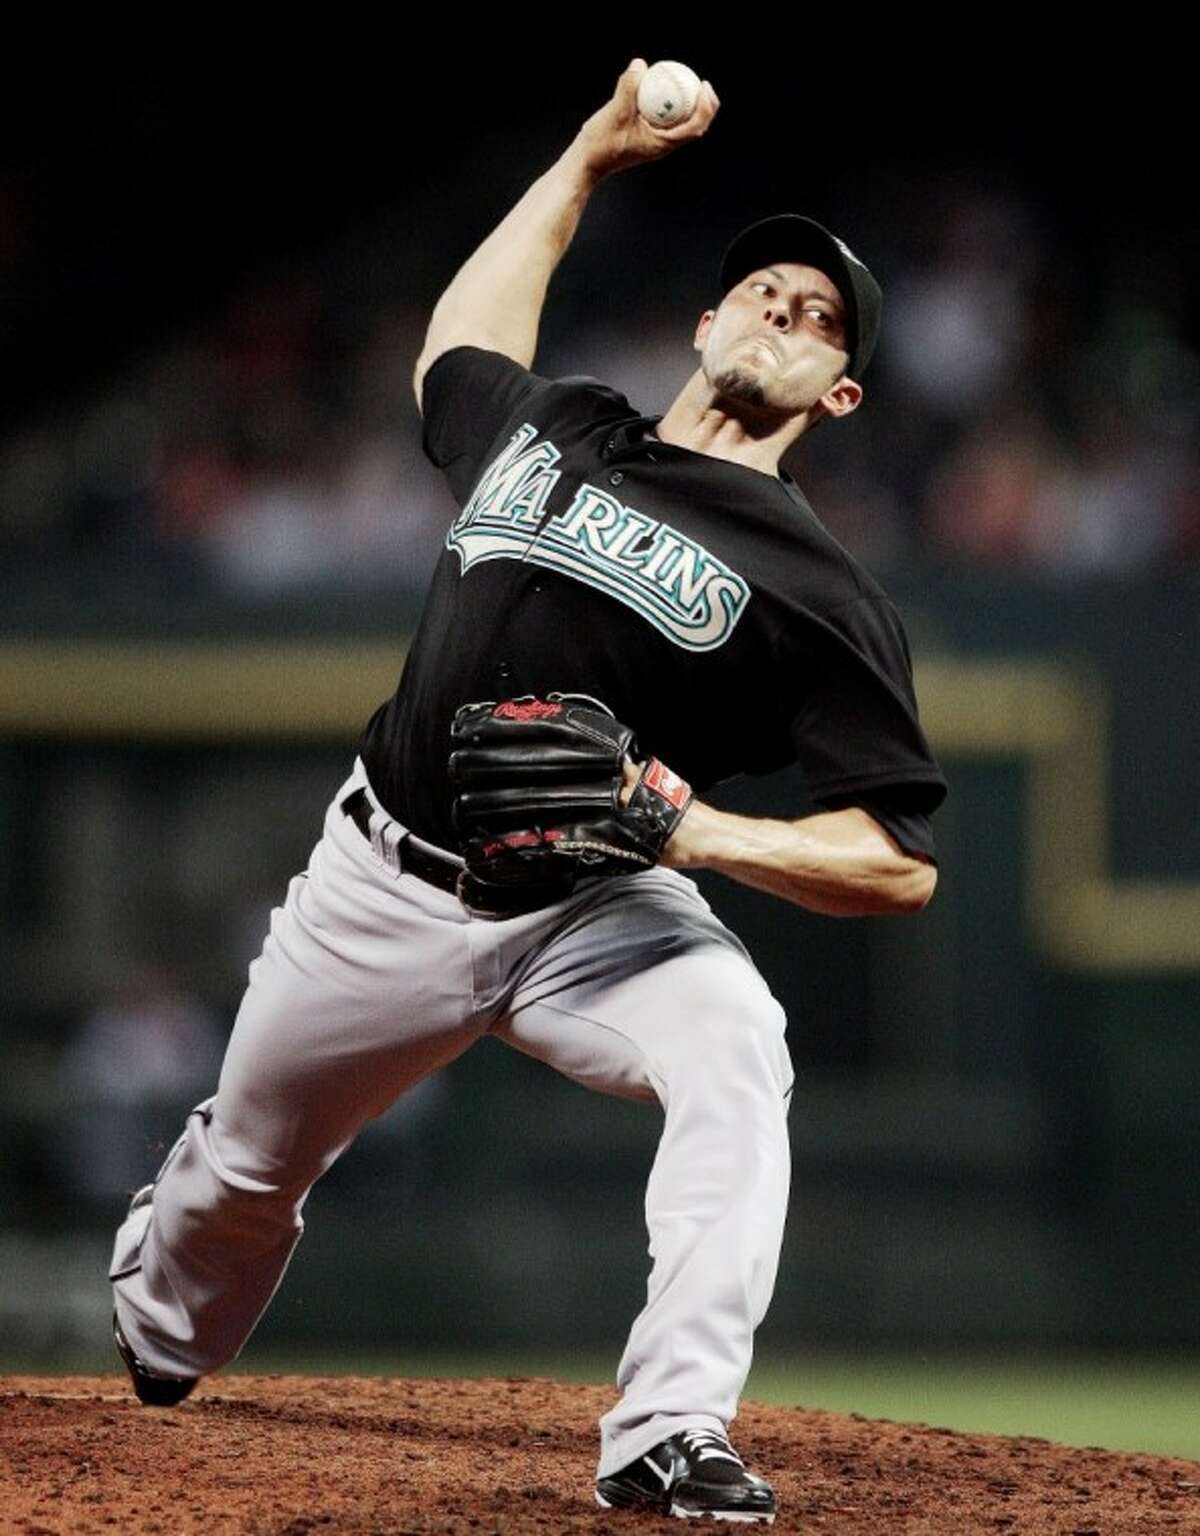 Pearland's Clay Hensley picked up his first victory as a starter in nearly four years when the Florida Marlins defeated the New York Mets, 4-1, last week.